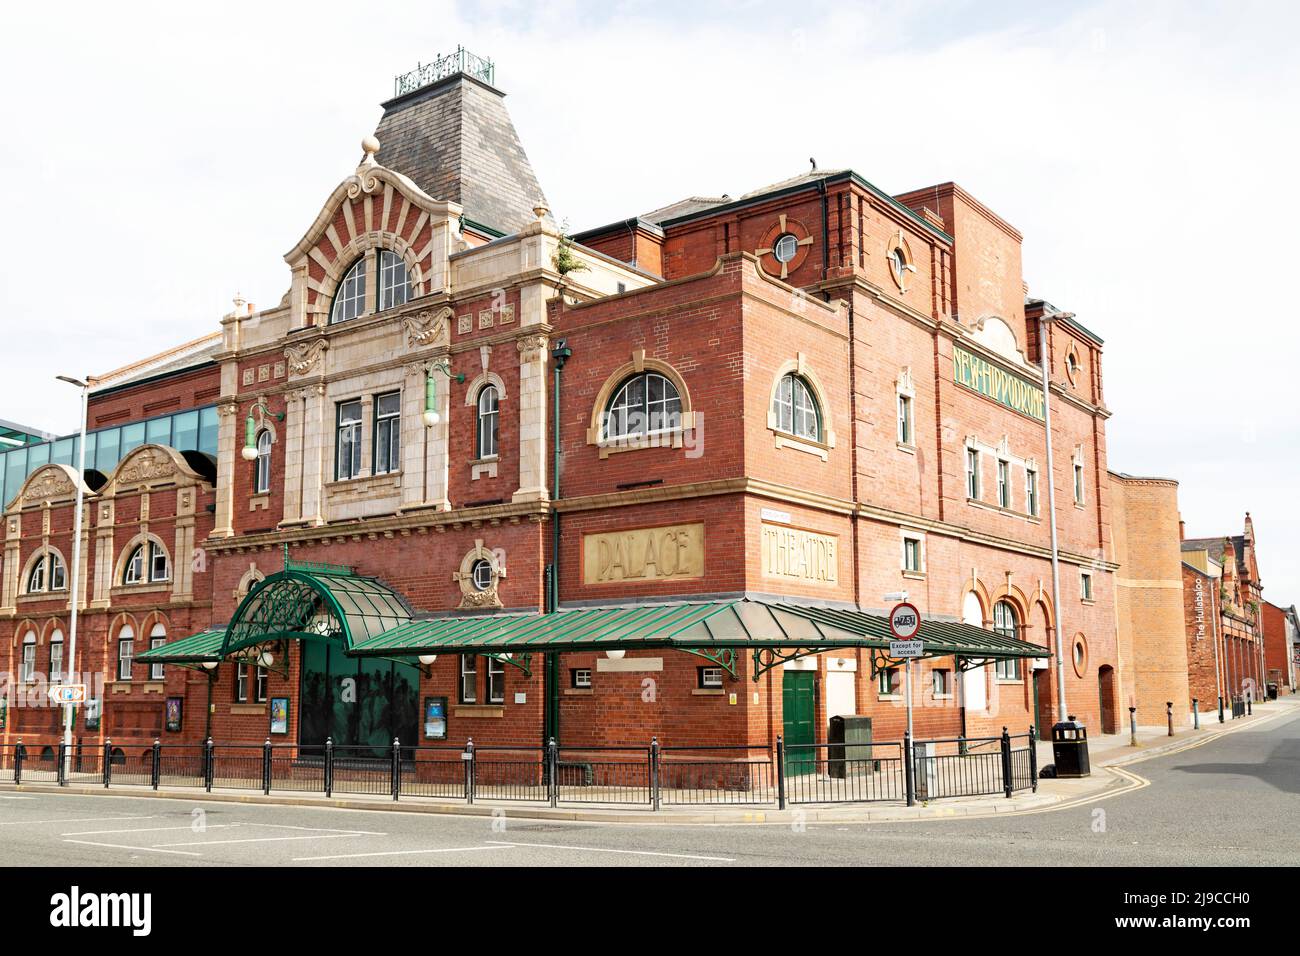 The Darlington Hippodrome theatre in Darlington, County Durham, England. The restored Edwardian theatre has a main and studio theatre plus an onsite c Stock Photo